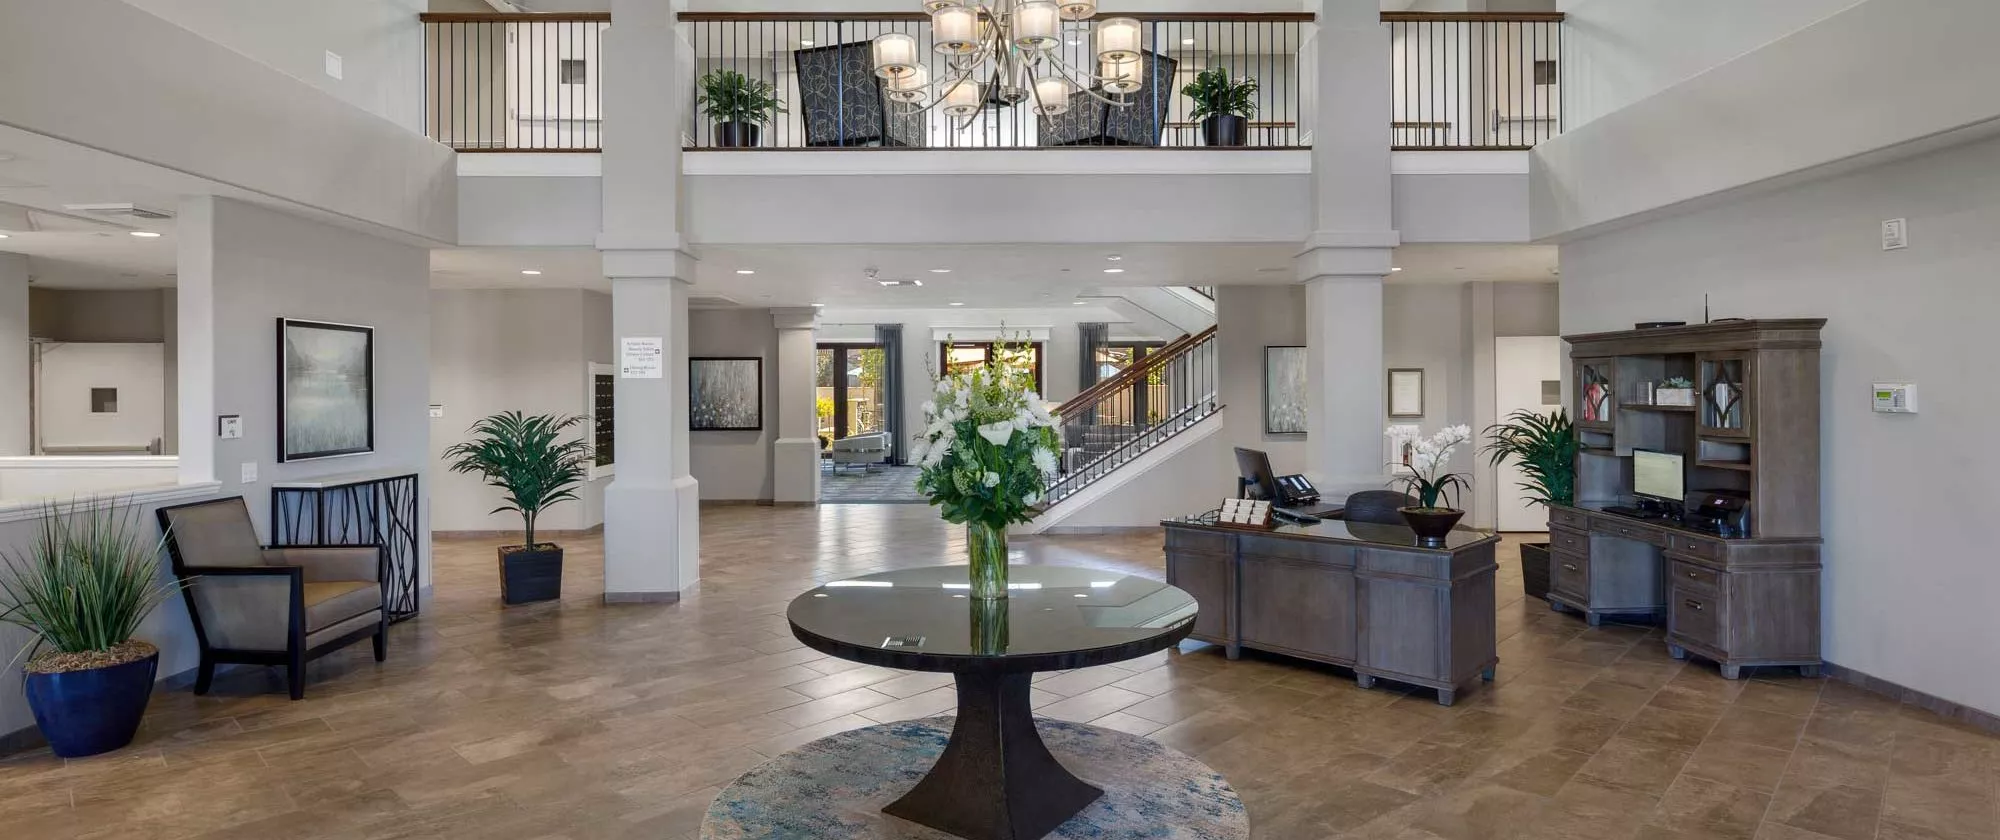 Riverpark elegant entry hall with chandelier